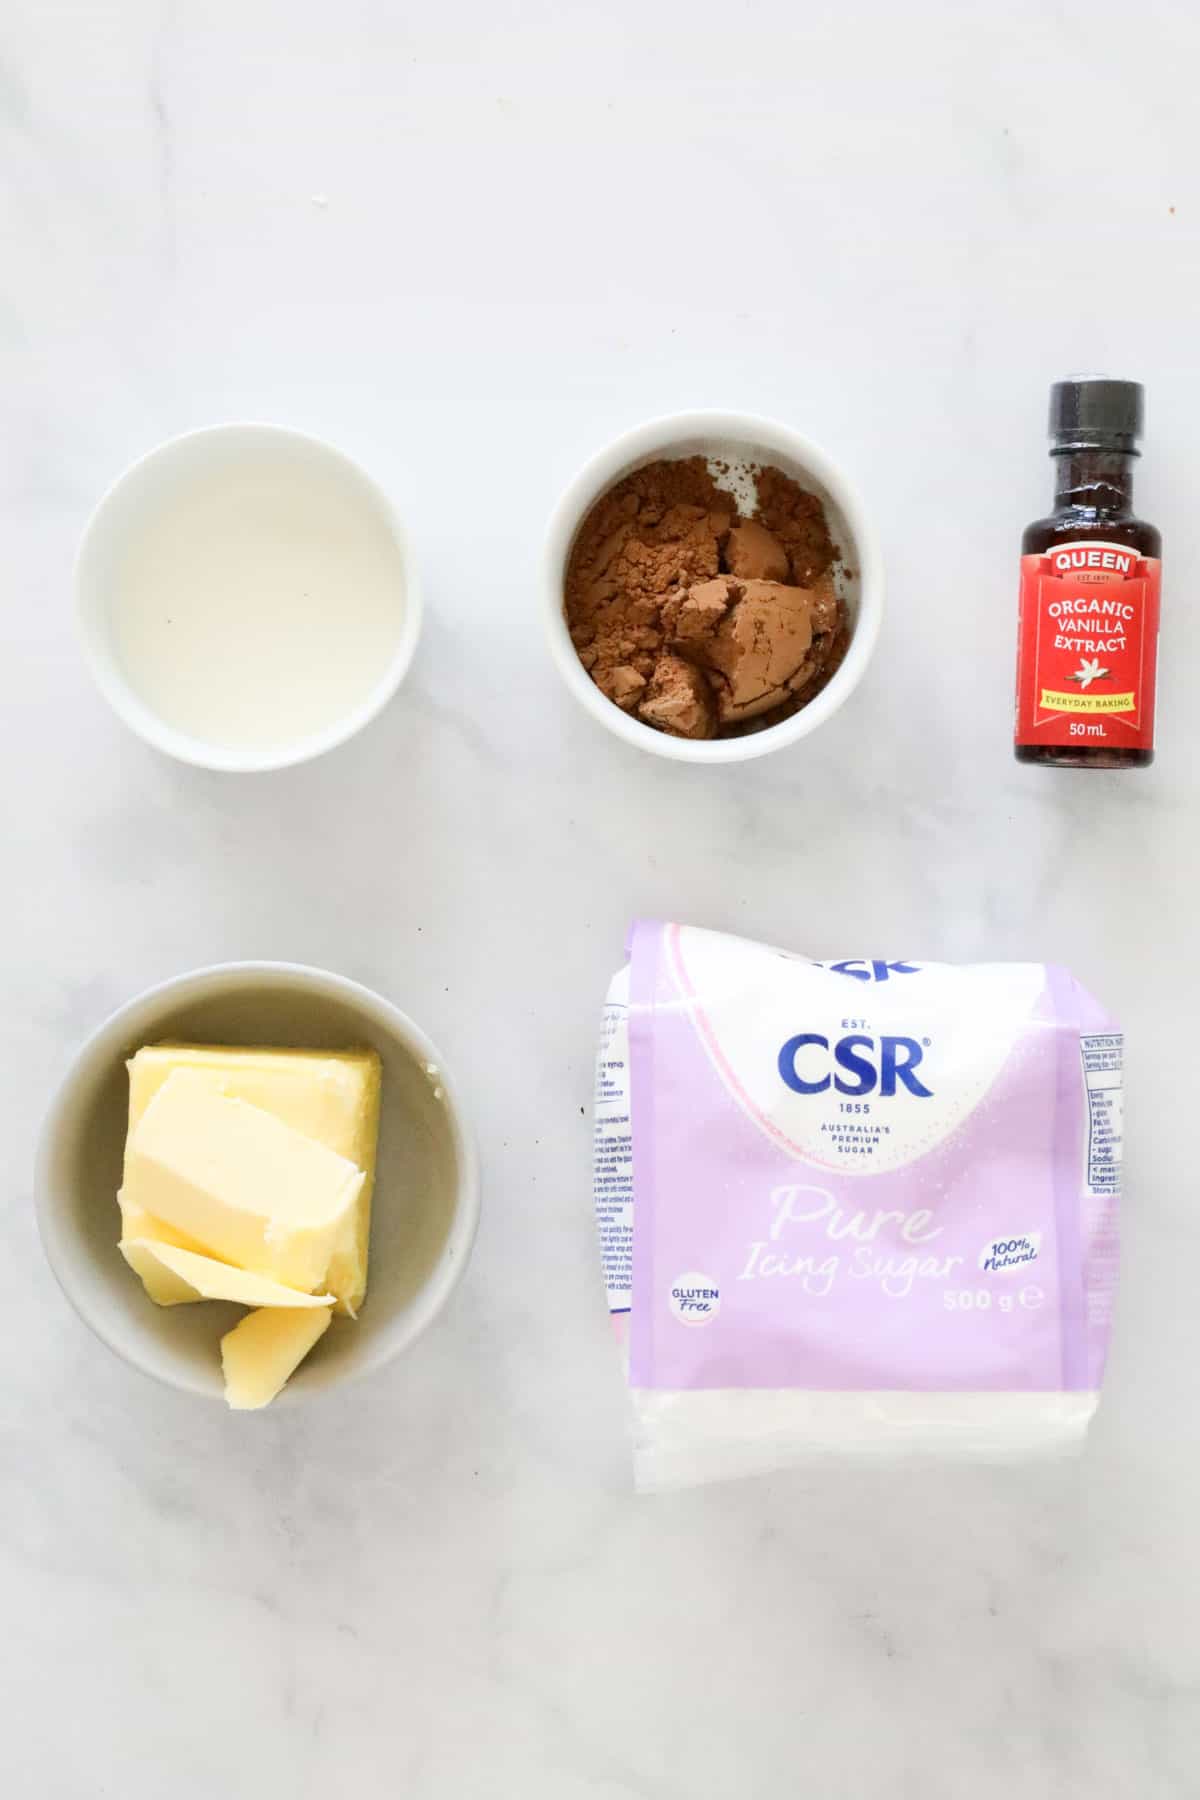 The ingredients needed to make chocolate buttercream weighed out and placed in individual bowls.